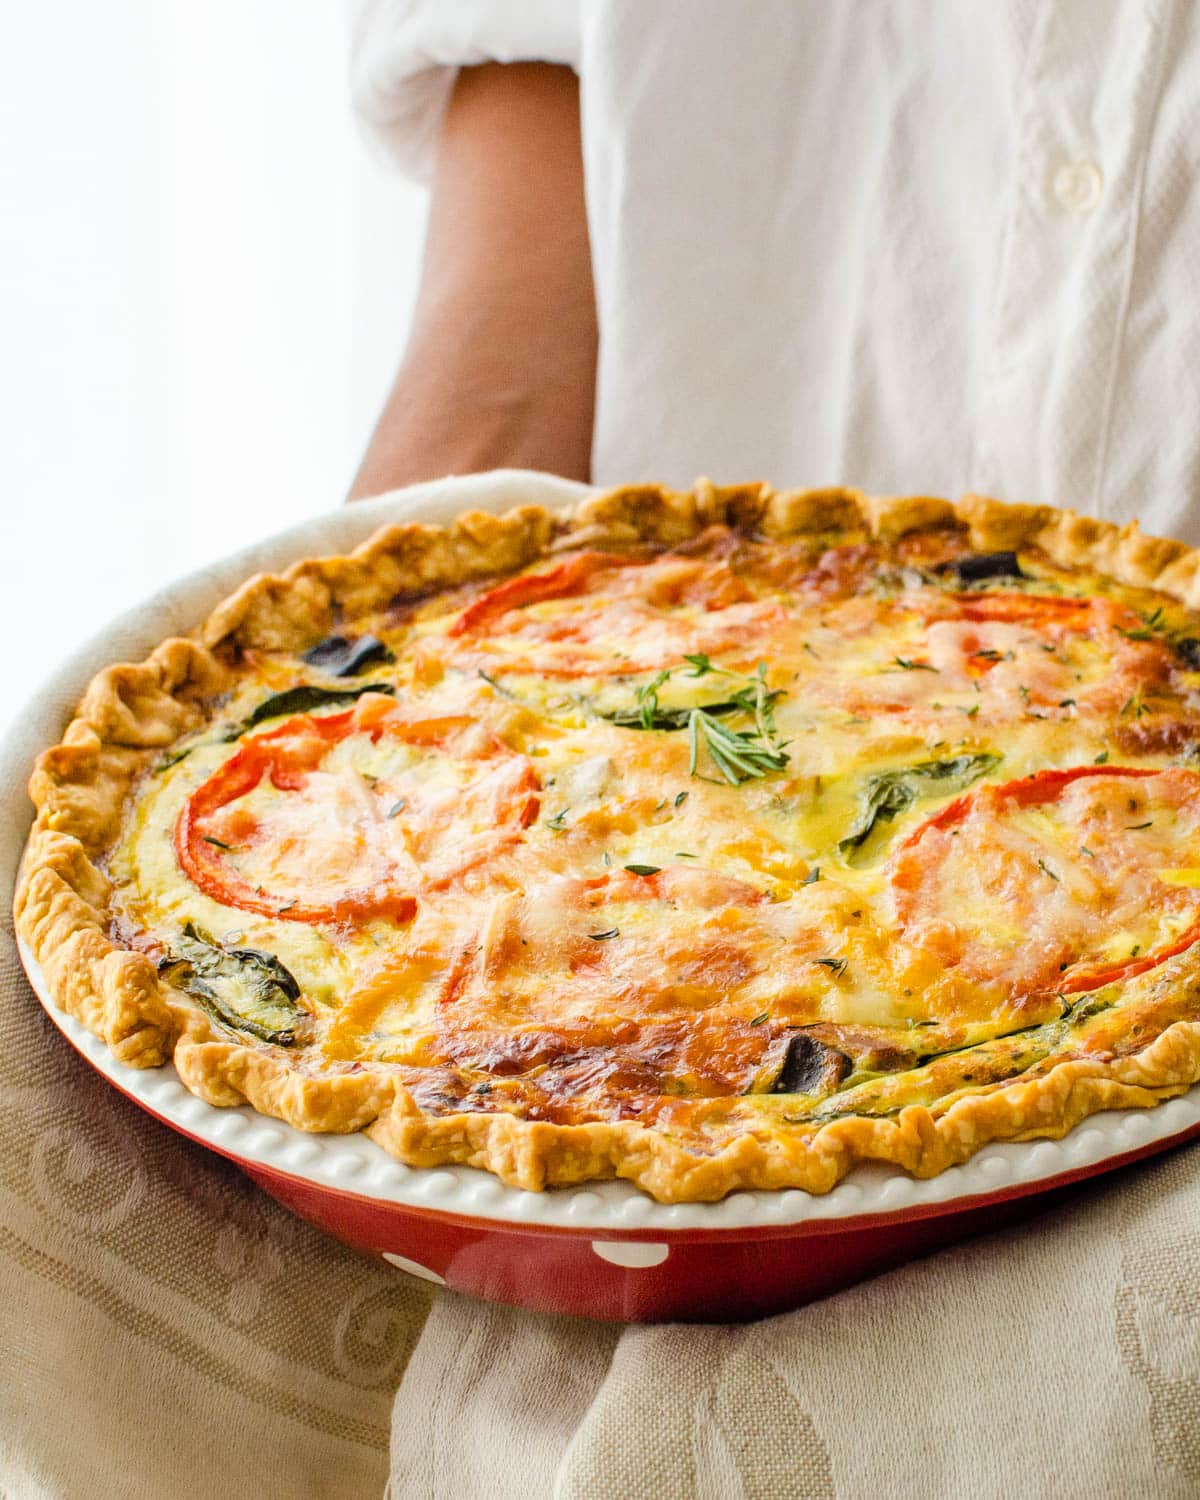 Taking the ratatouille quiche from the oven.